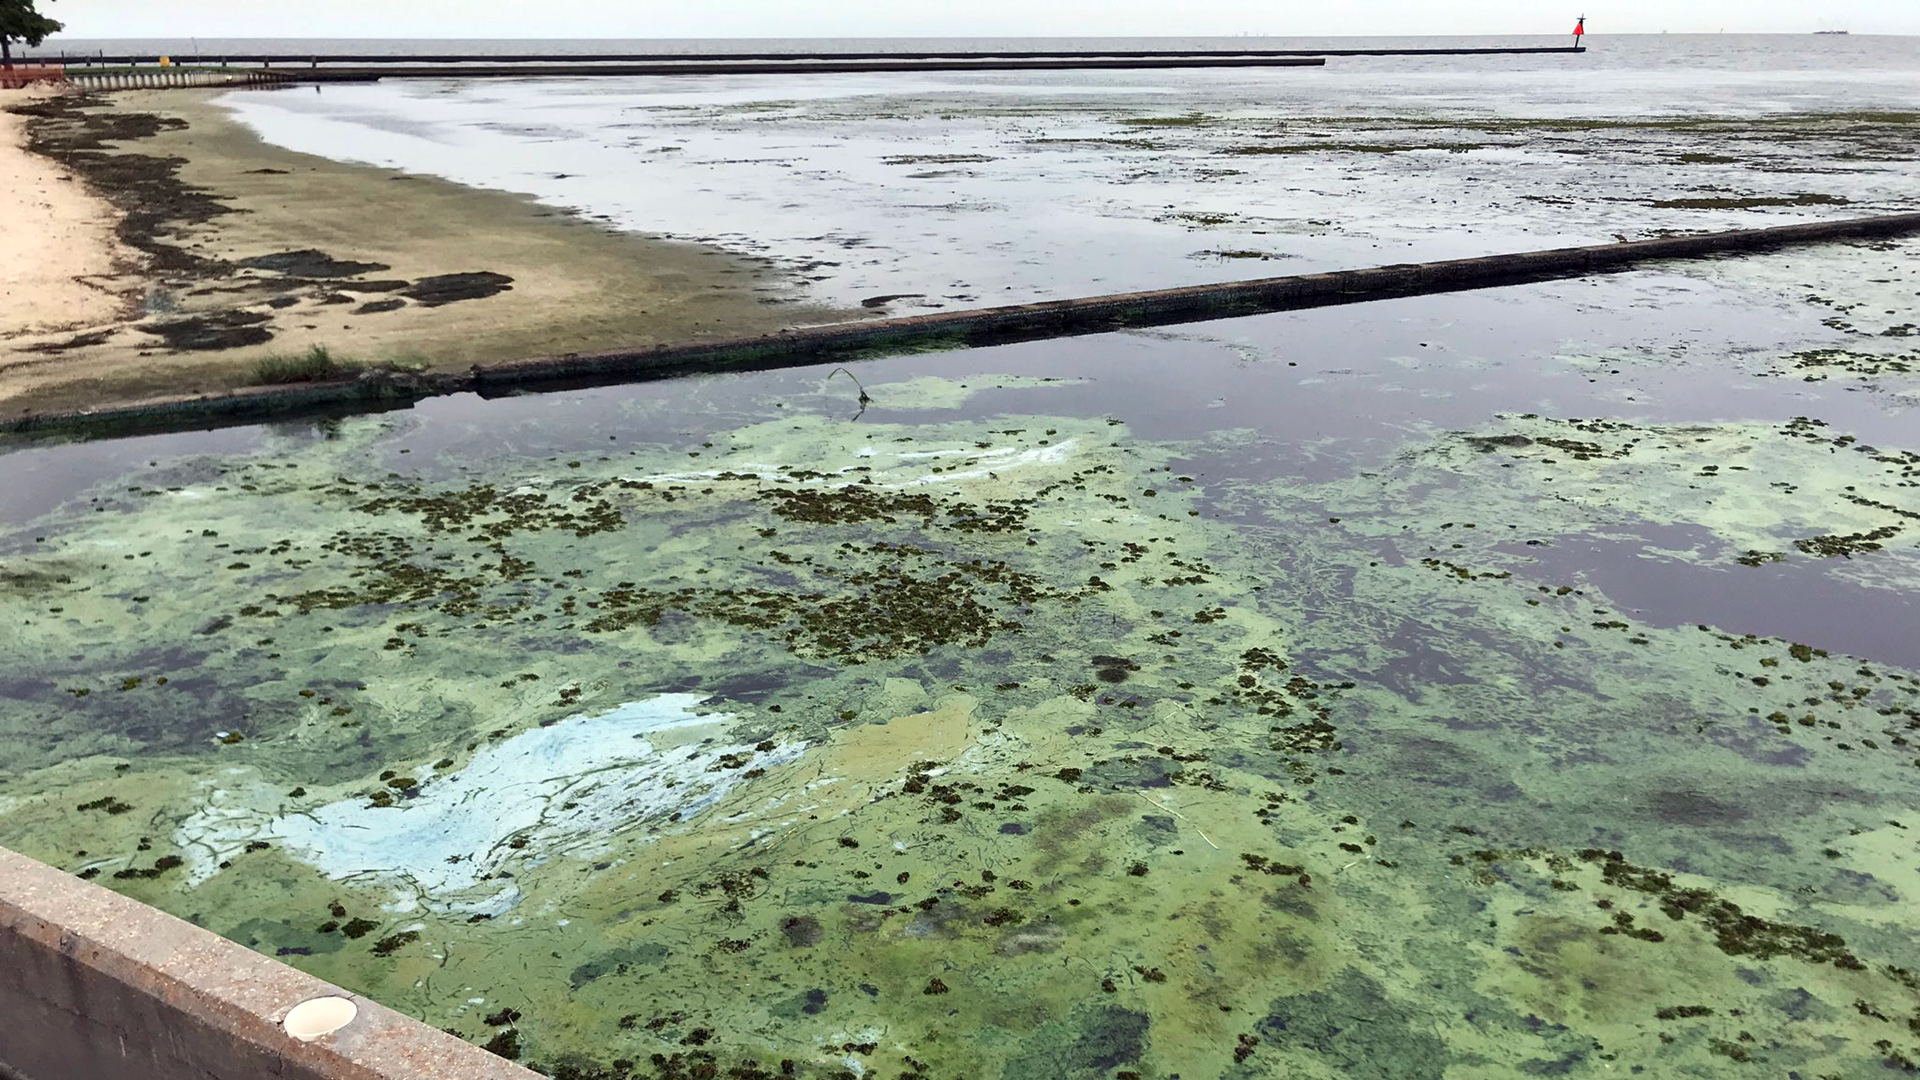 The Lake Pontchartrain Basin Foundation has taken samples of this algae to determine if it's toxic